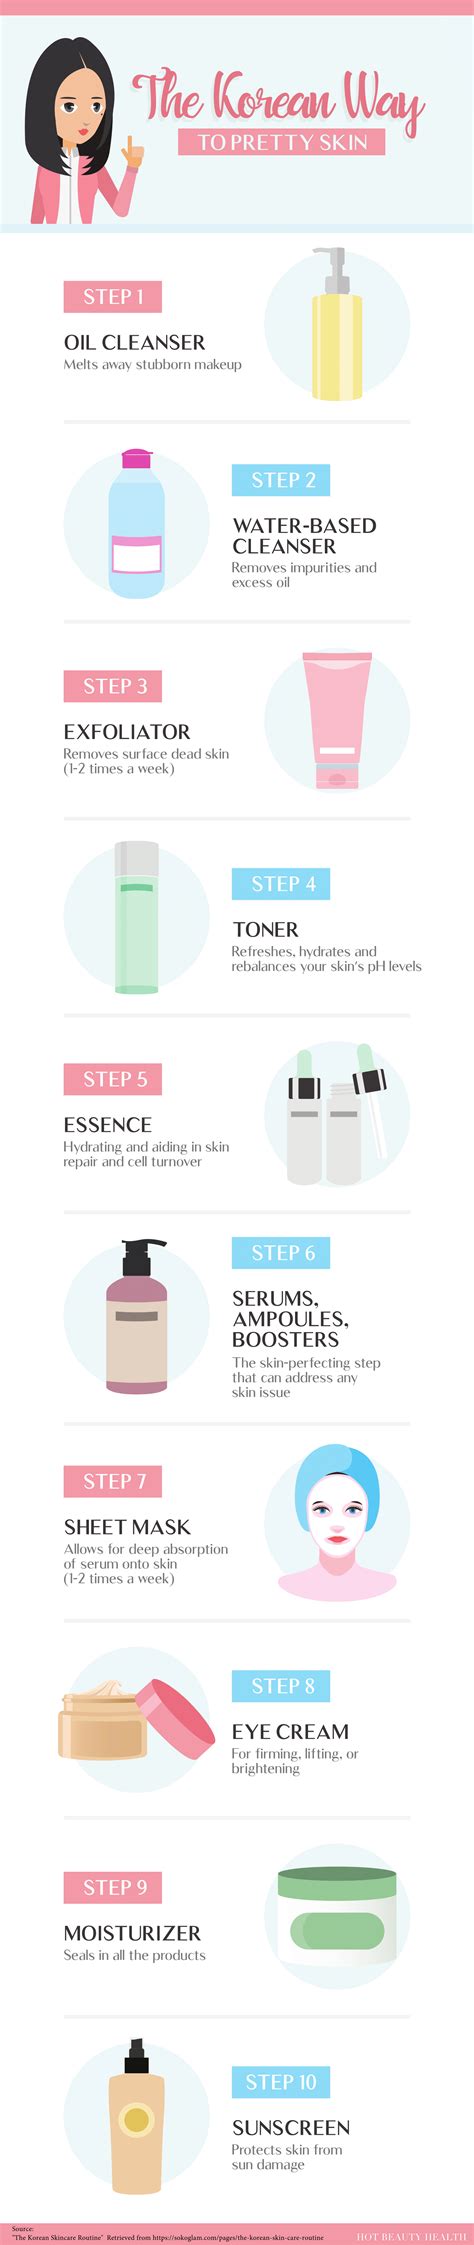 The 10 Step Korean Skincare Routine Infographic Hot Beauty Daftsex Hd